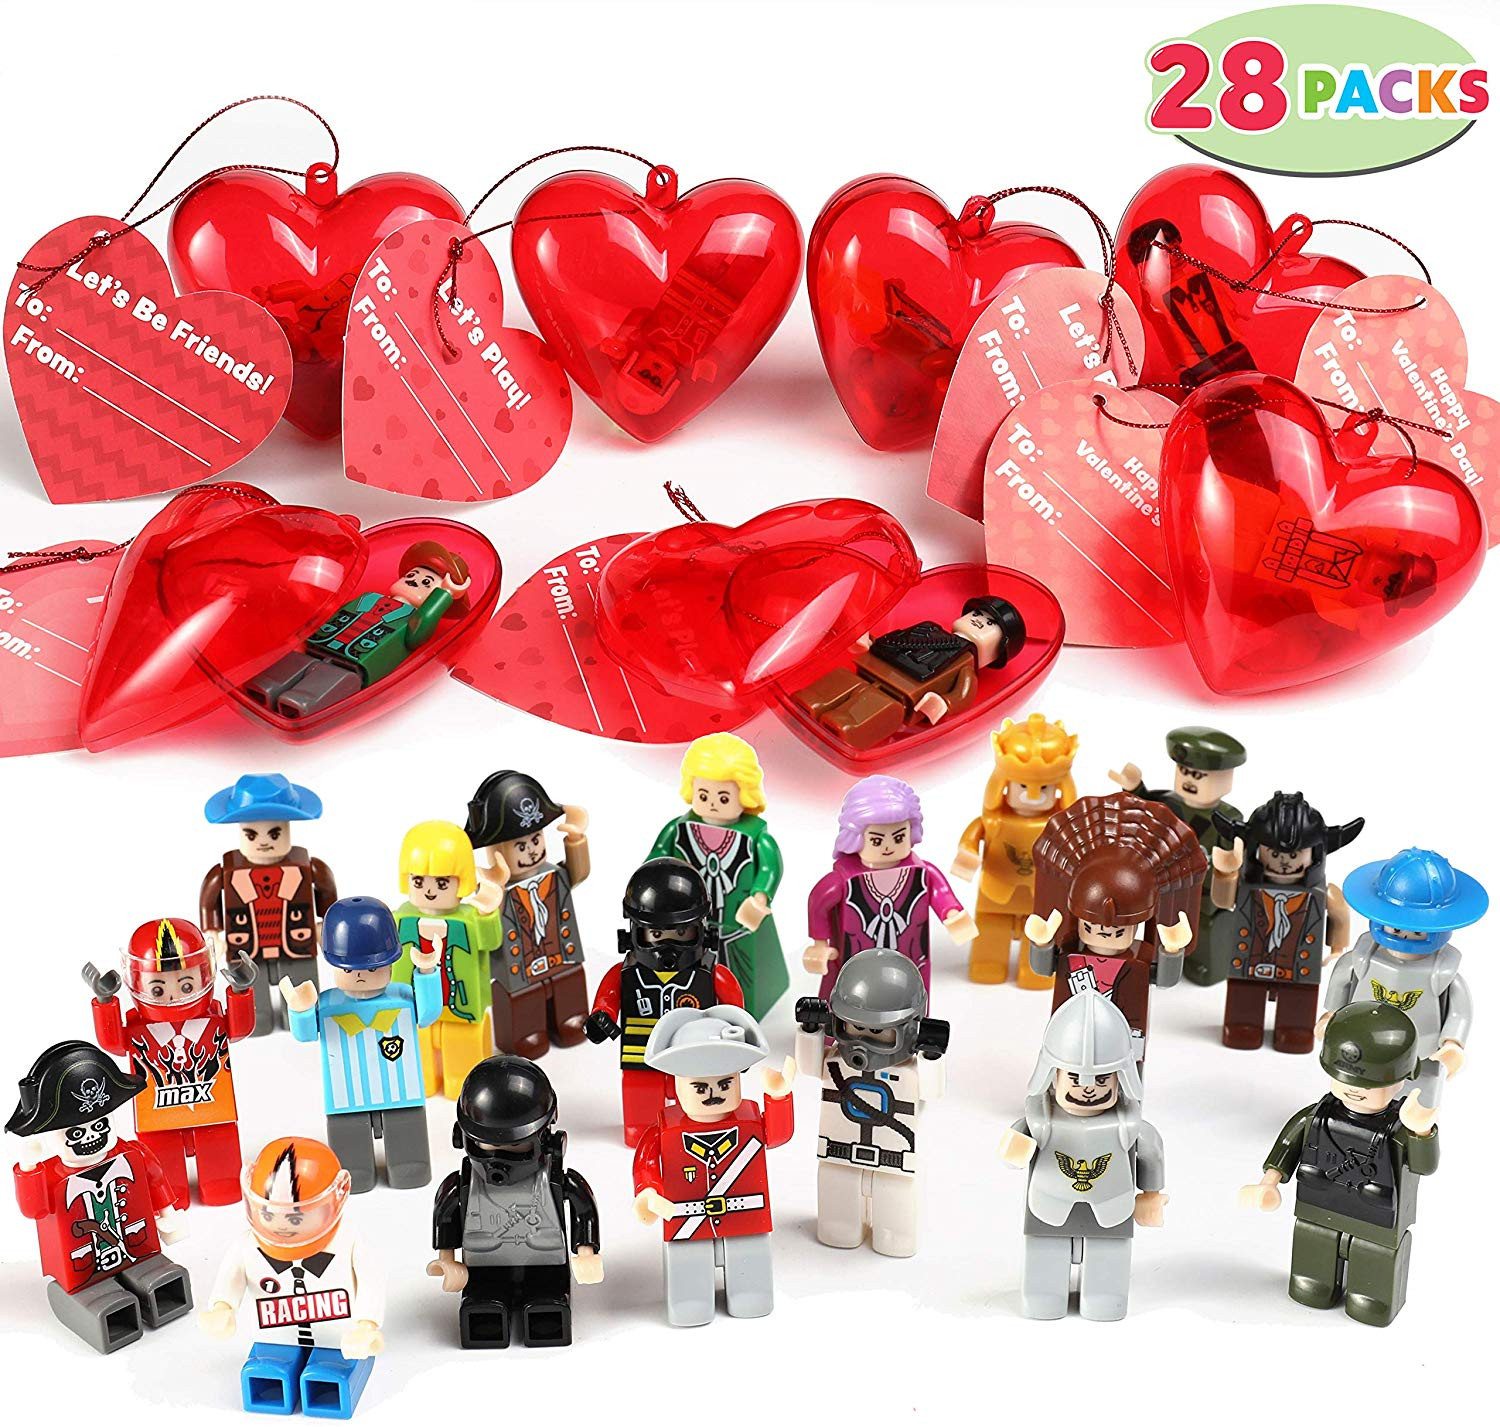 Valentines Day Gift For Girl
 28 Packs Kids Valentine Party Favors Set Includes 28 Mini